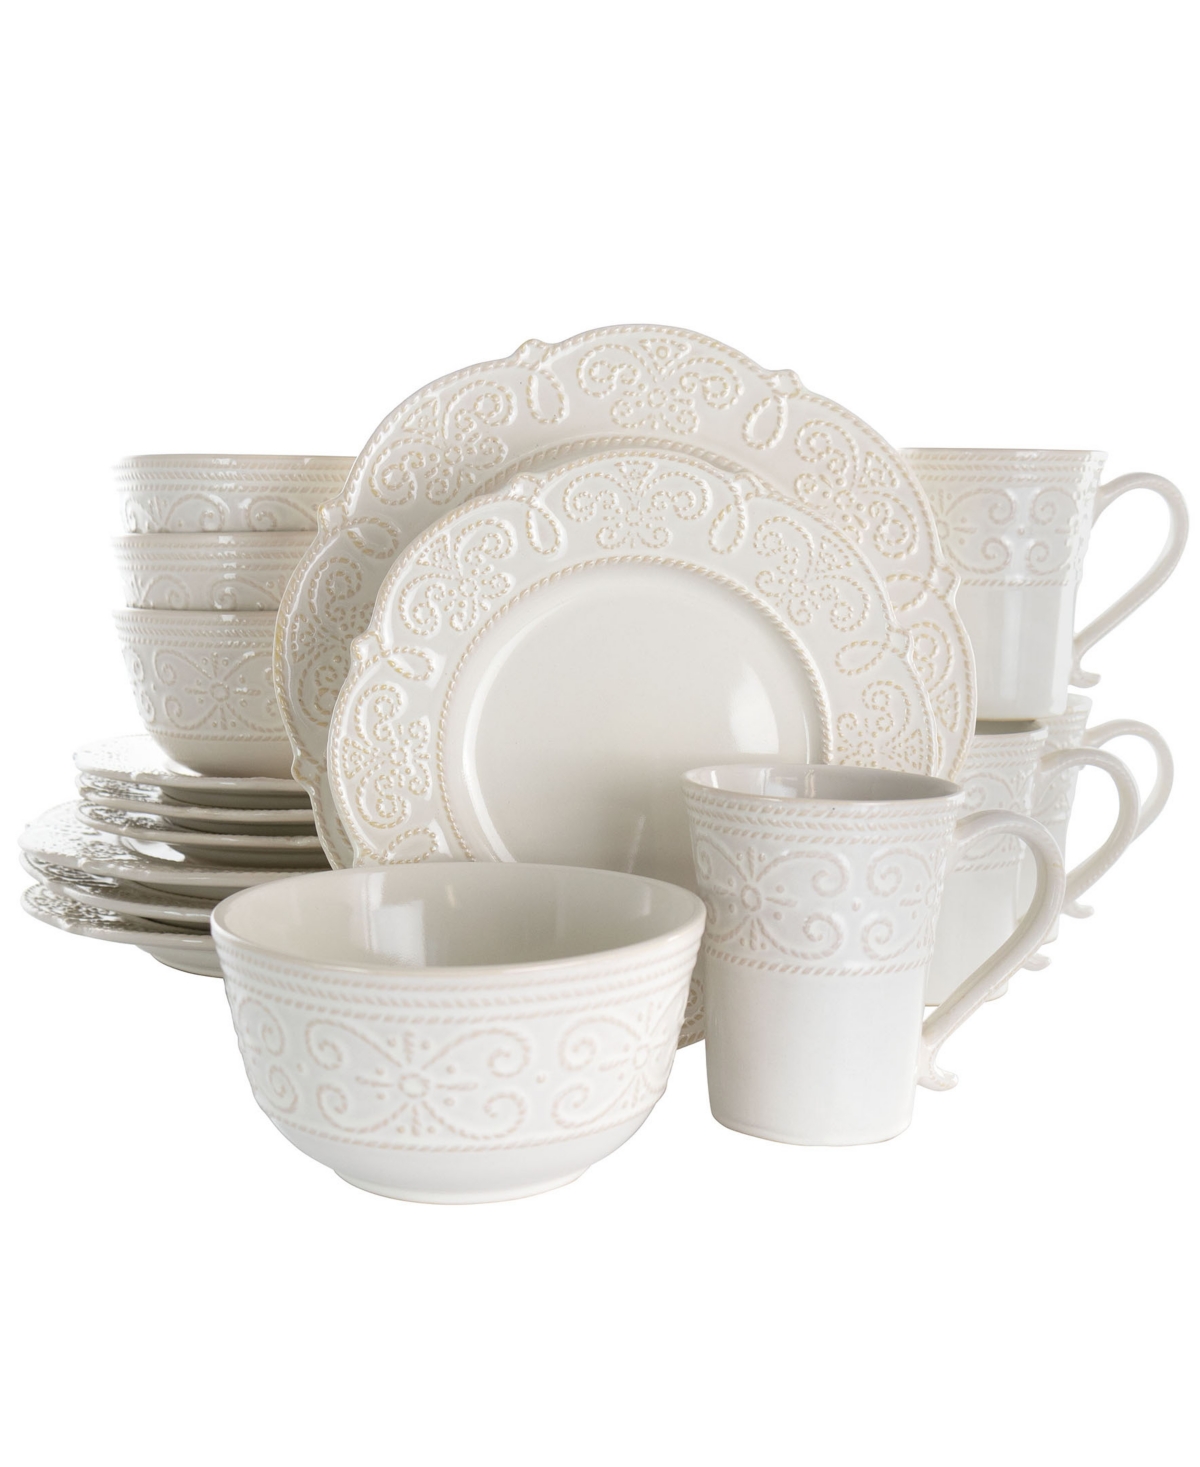 Luna Embossed Scalloped Dinnerware Set of 16 Pieces - White